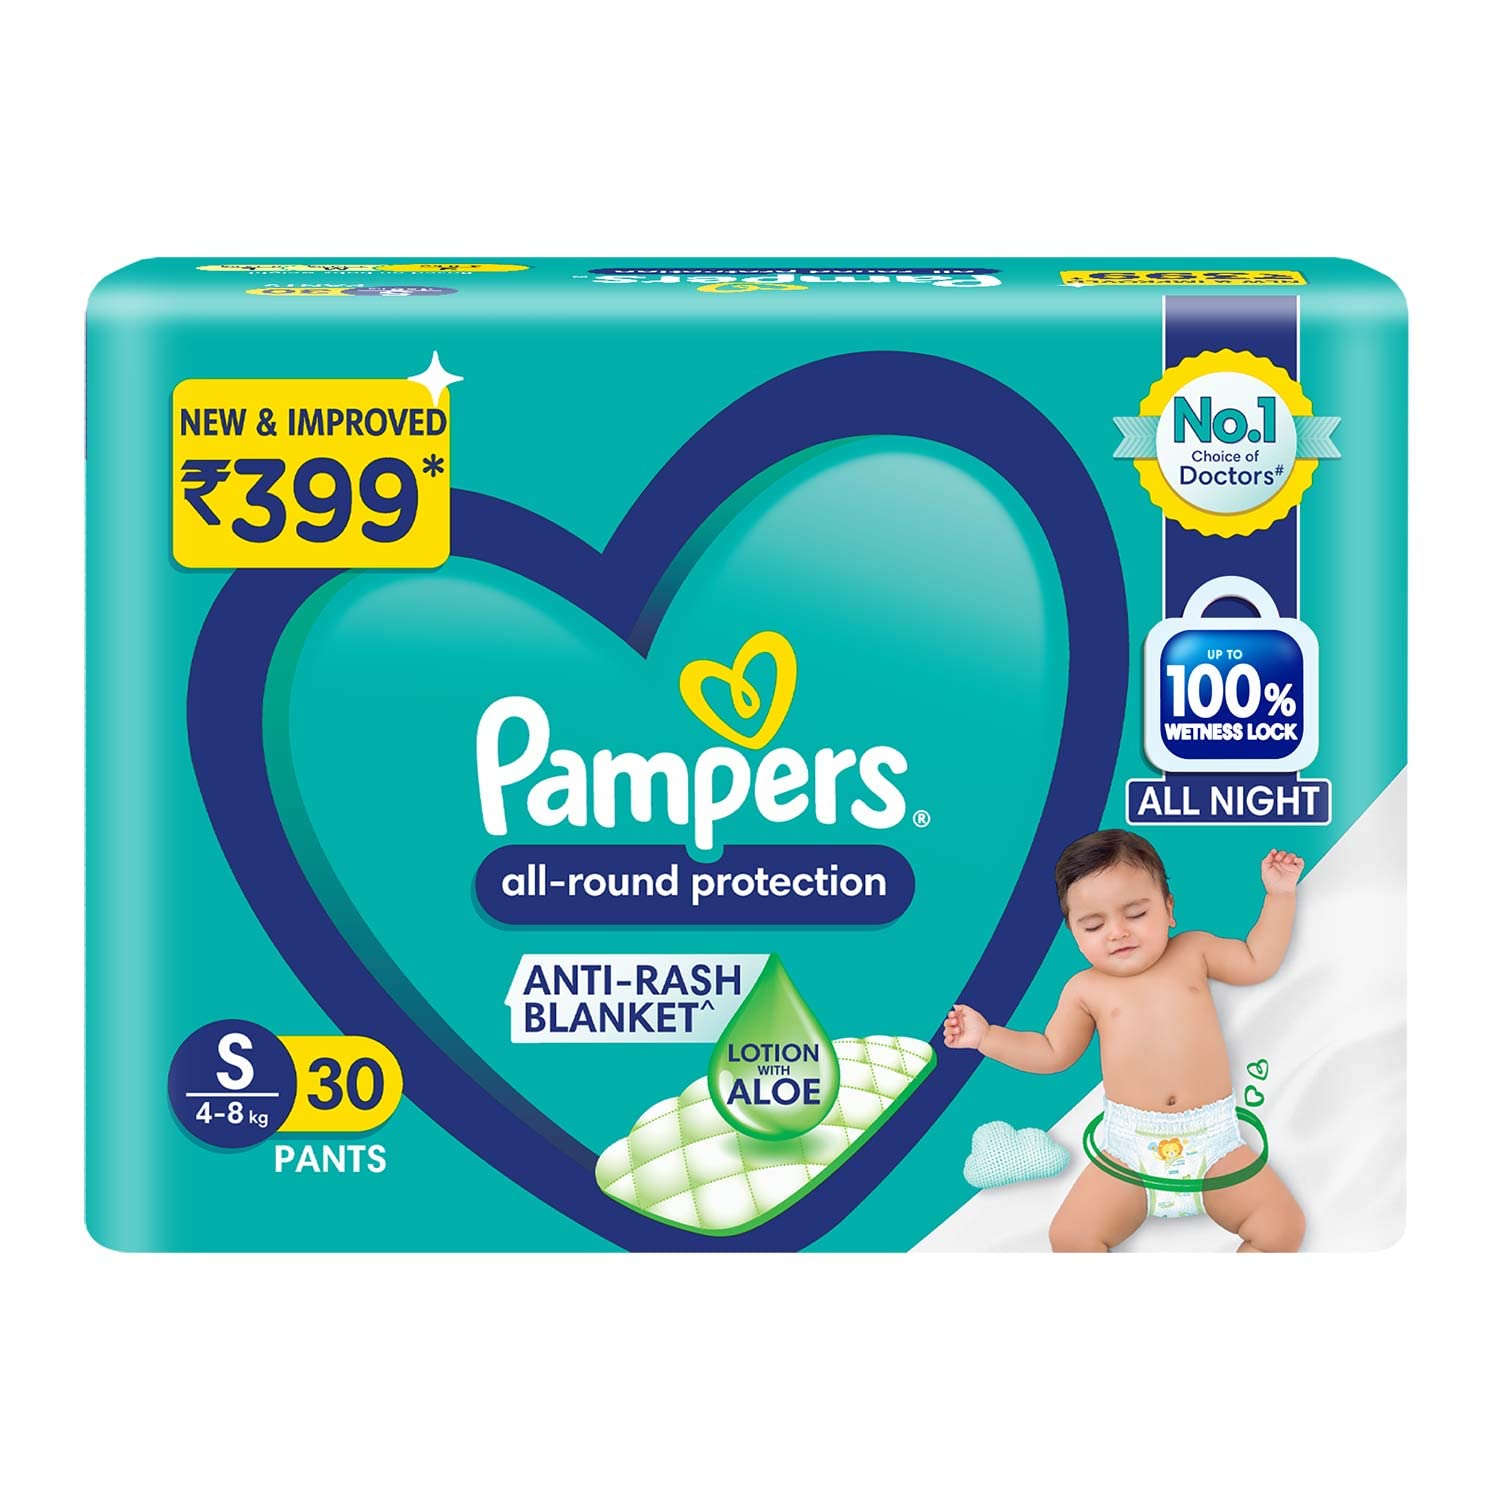 pampers aqua pure or water wipes